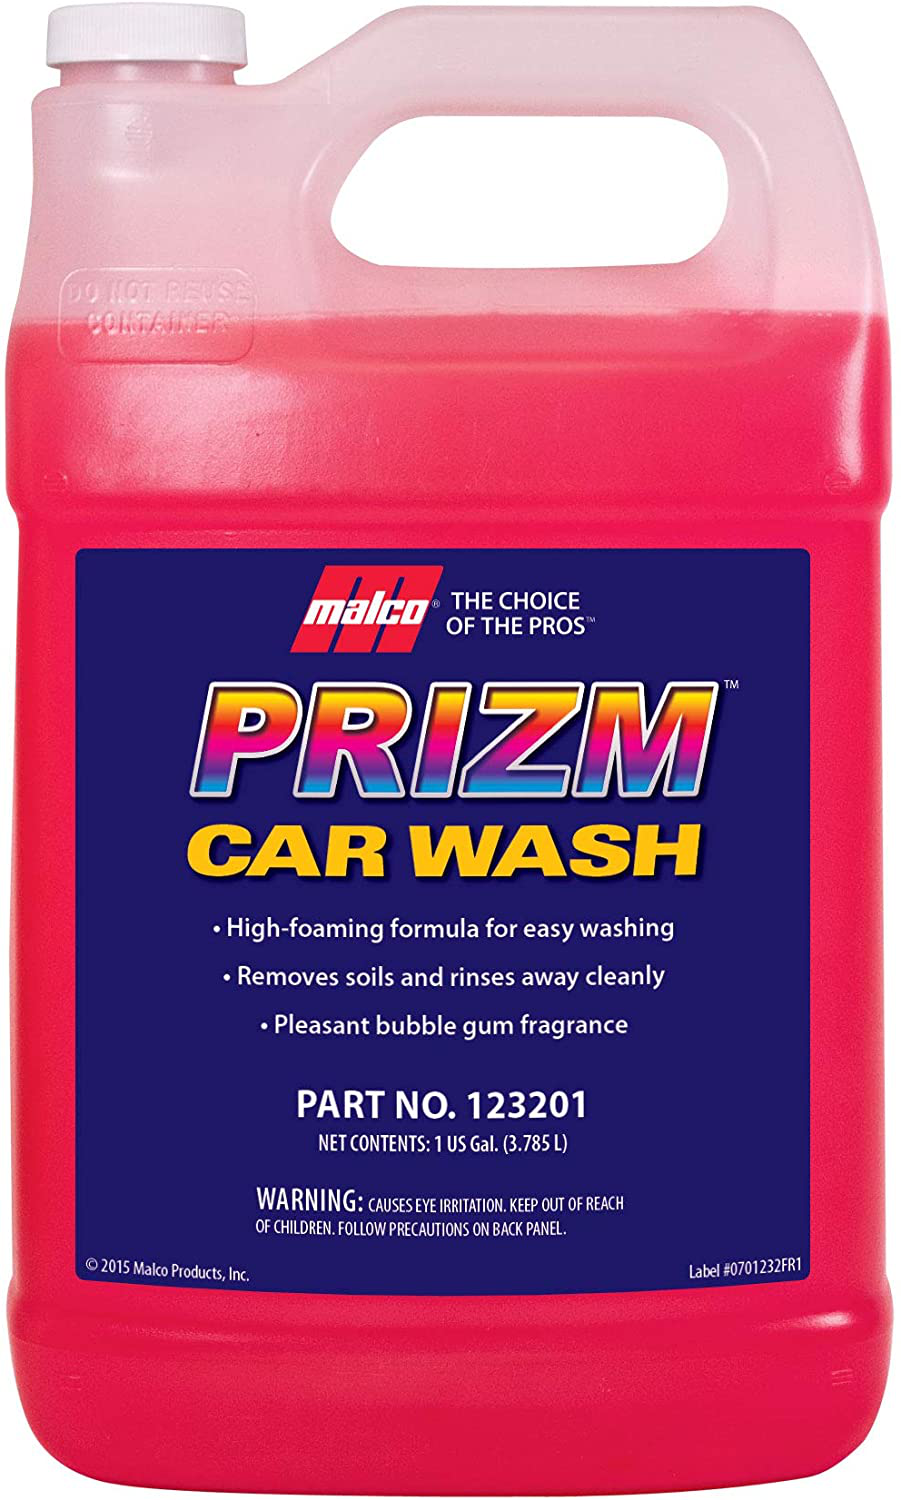 Malco Prizm Car Wash – Hard-Working, High-Foaming Automotive Cleaner/Formulated to Remove Soils and Rinse Away Cleanly/Excellent Cleaning Performance and Value / 1 Gallon (123201)